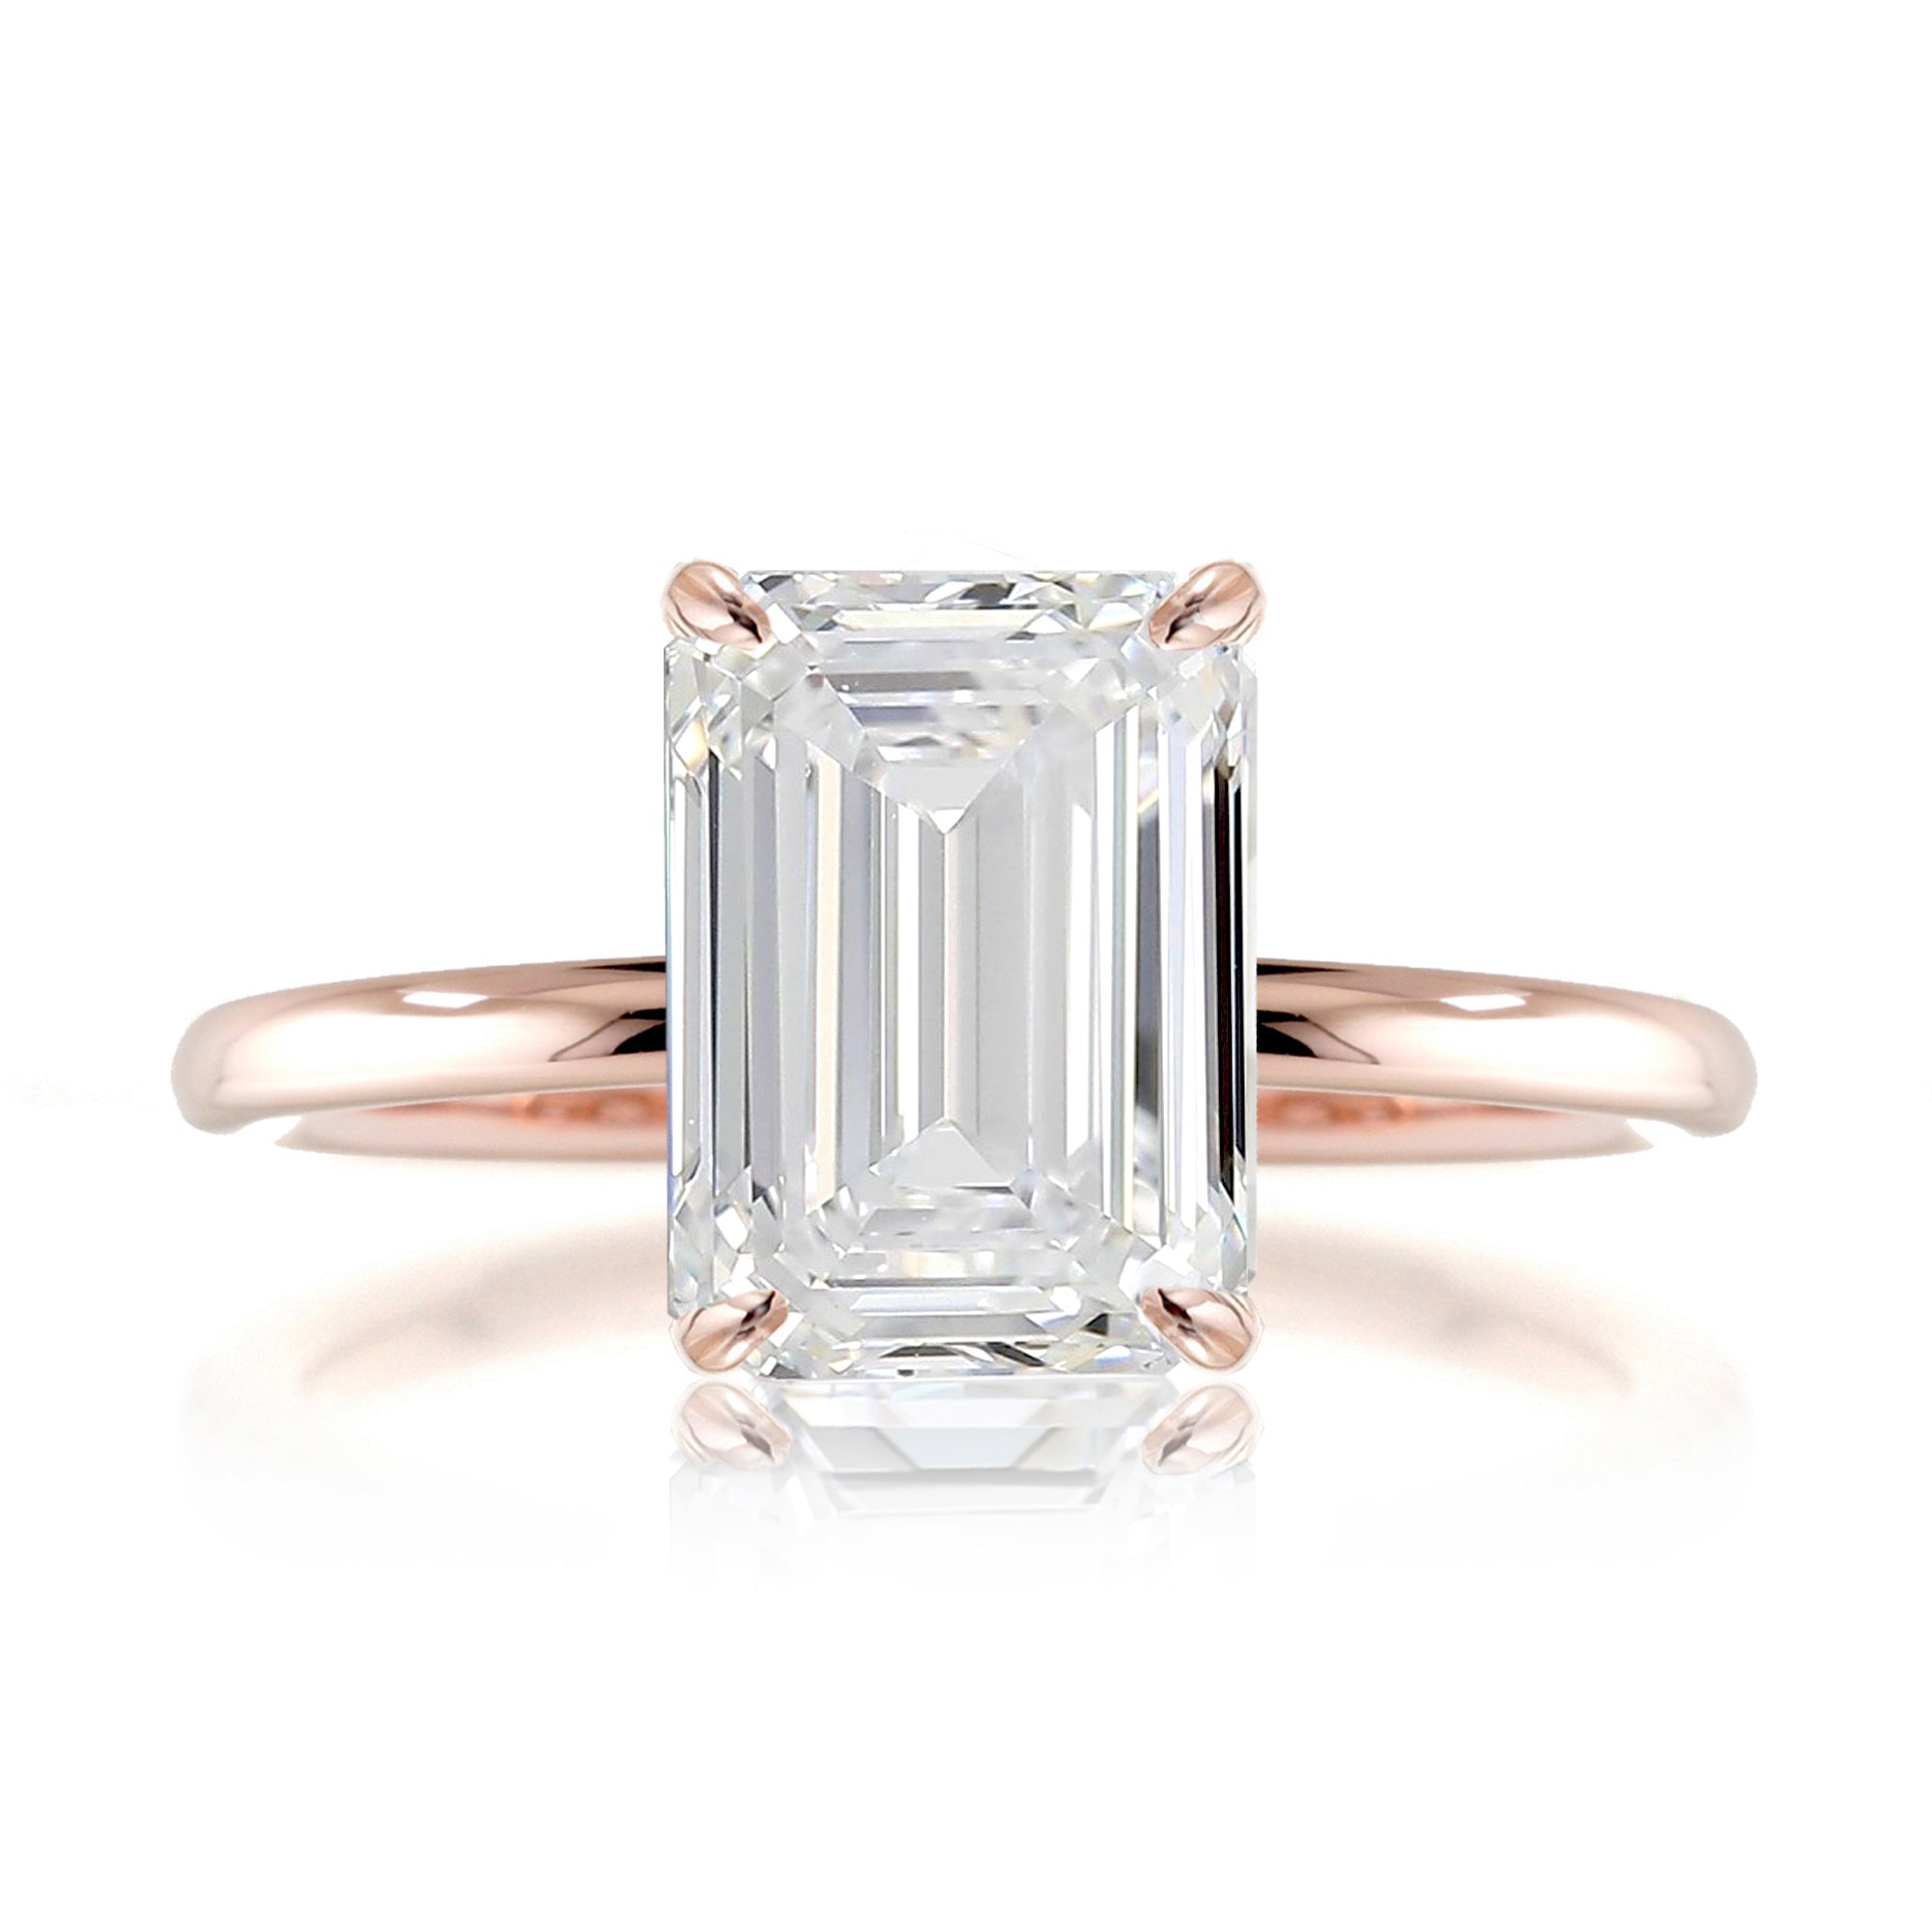 Emerald cut solid band engagement ring rose gold - the Ava